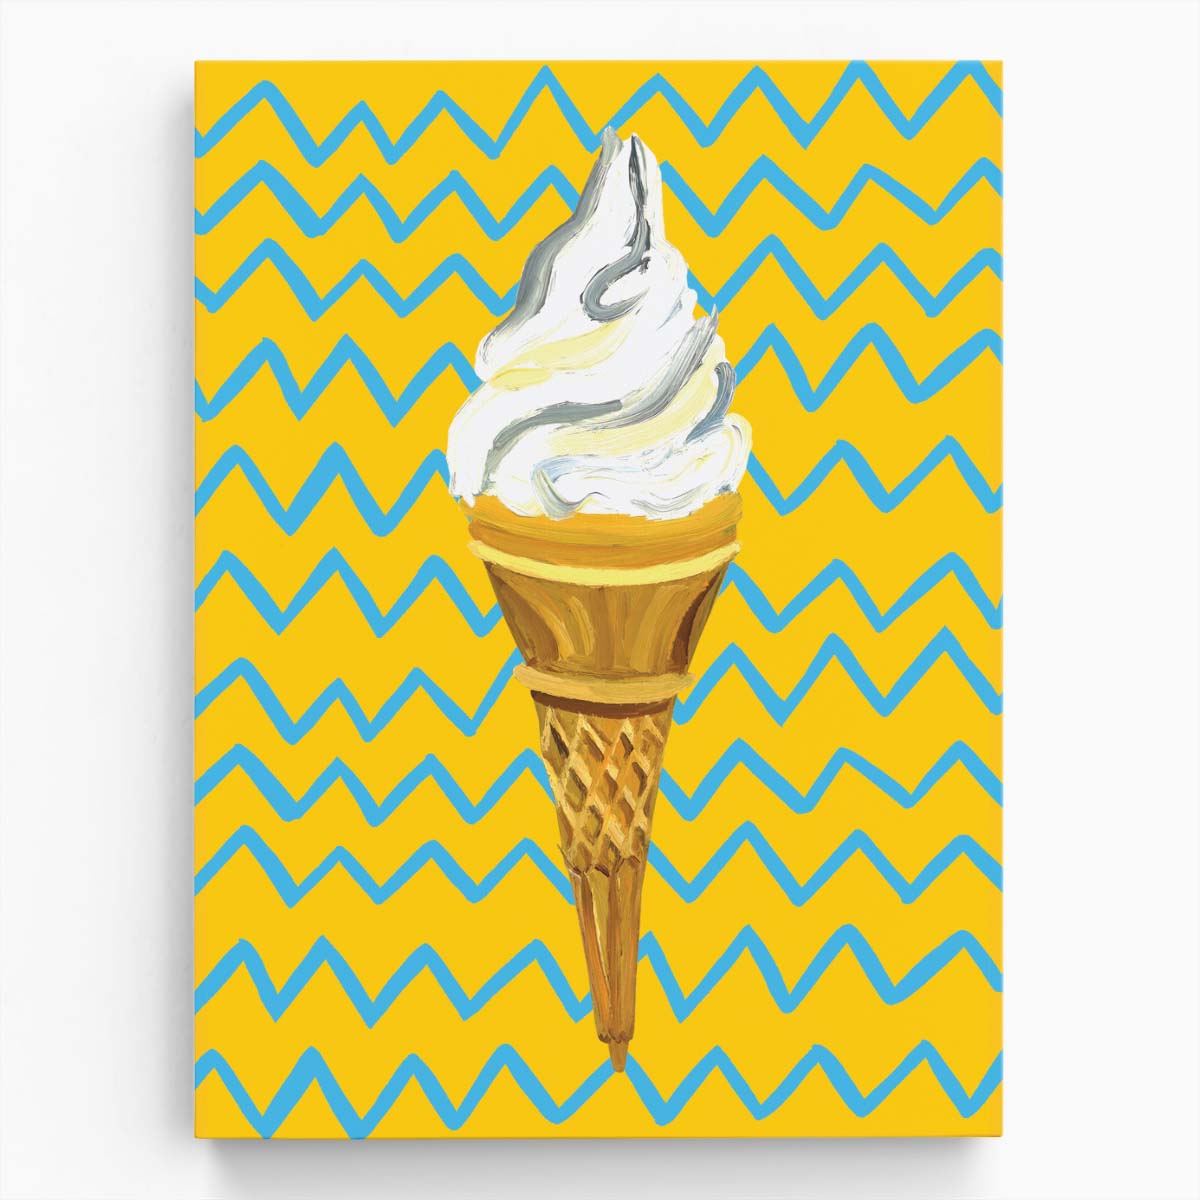 Abstract Geometric Yellow Ice Cream Illustration Kitchen Wall Art by Luxuriance Designs, made in USA